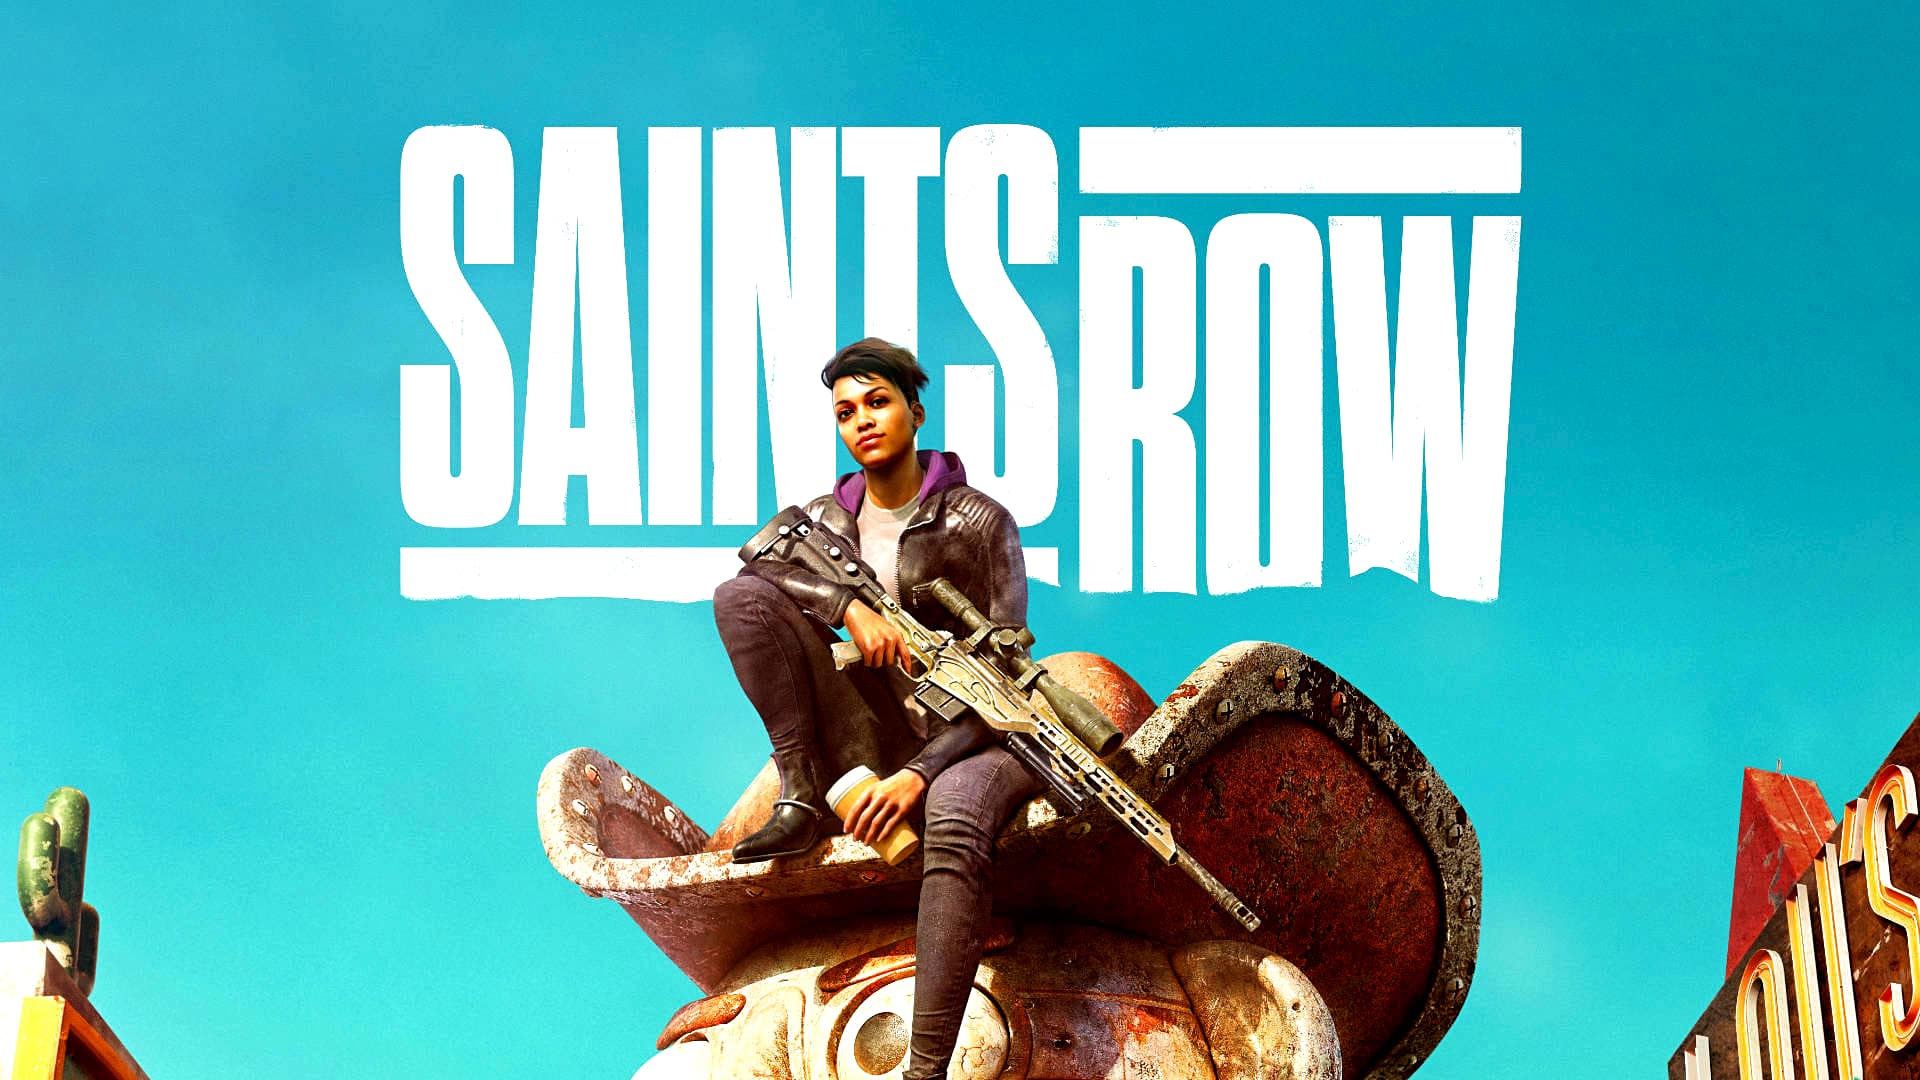 Unsurprisingly, The 'Saints Row' Reboot Did Not Do Well